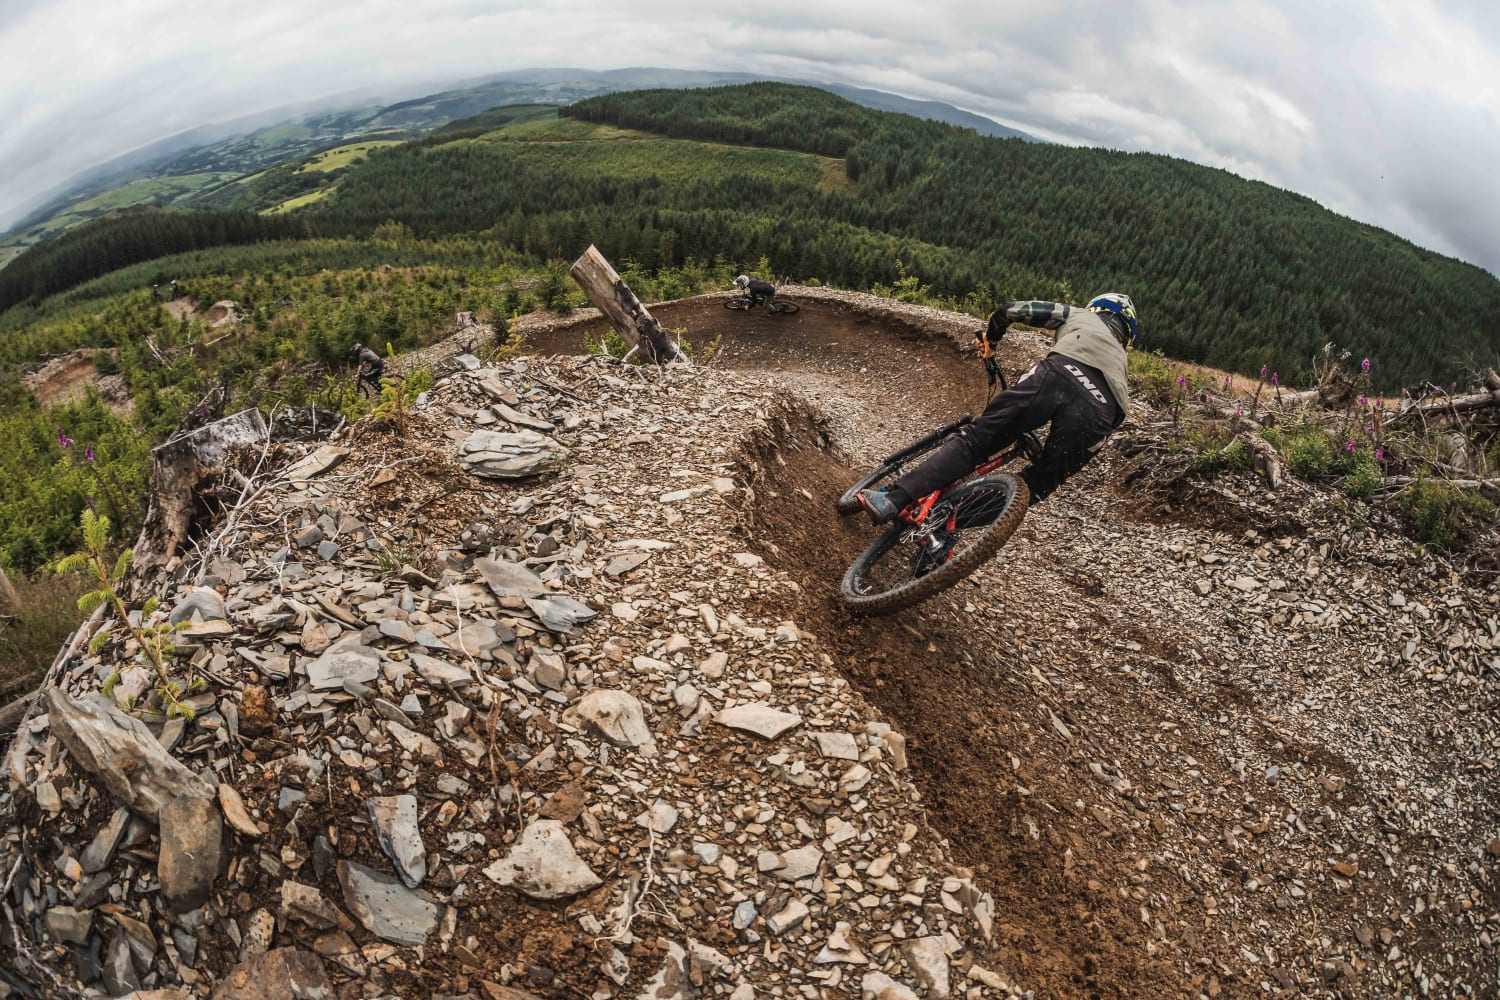 Dyfi Bike Park - Guide: Everything you need to know